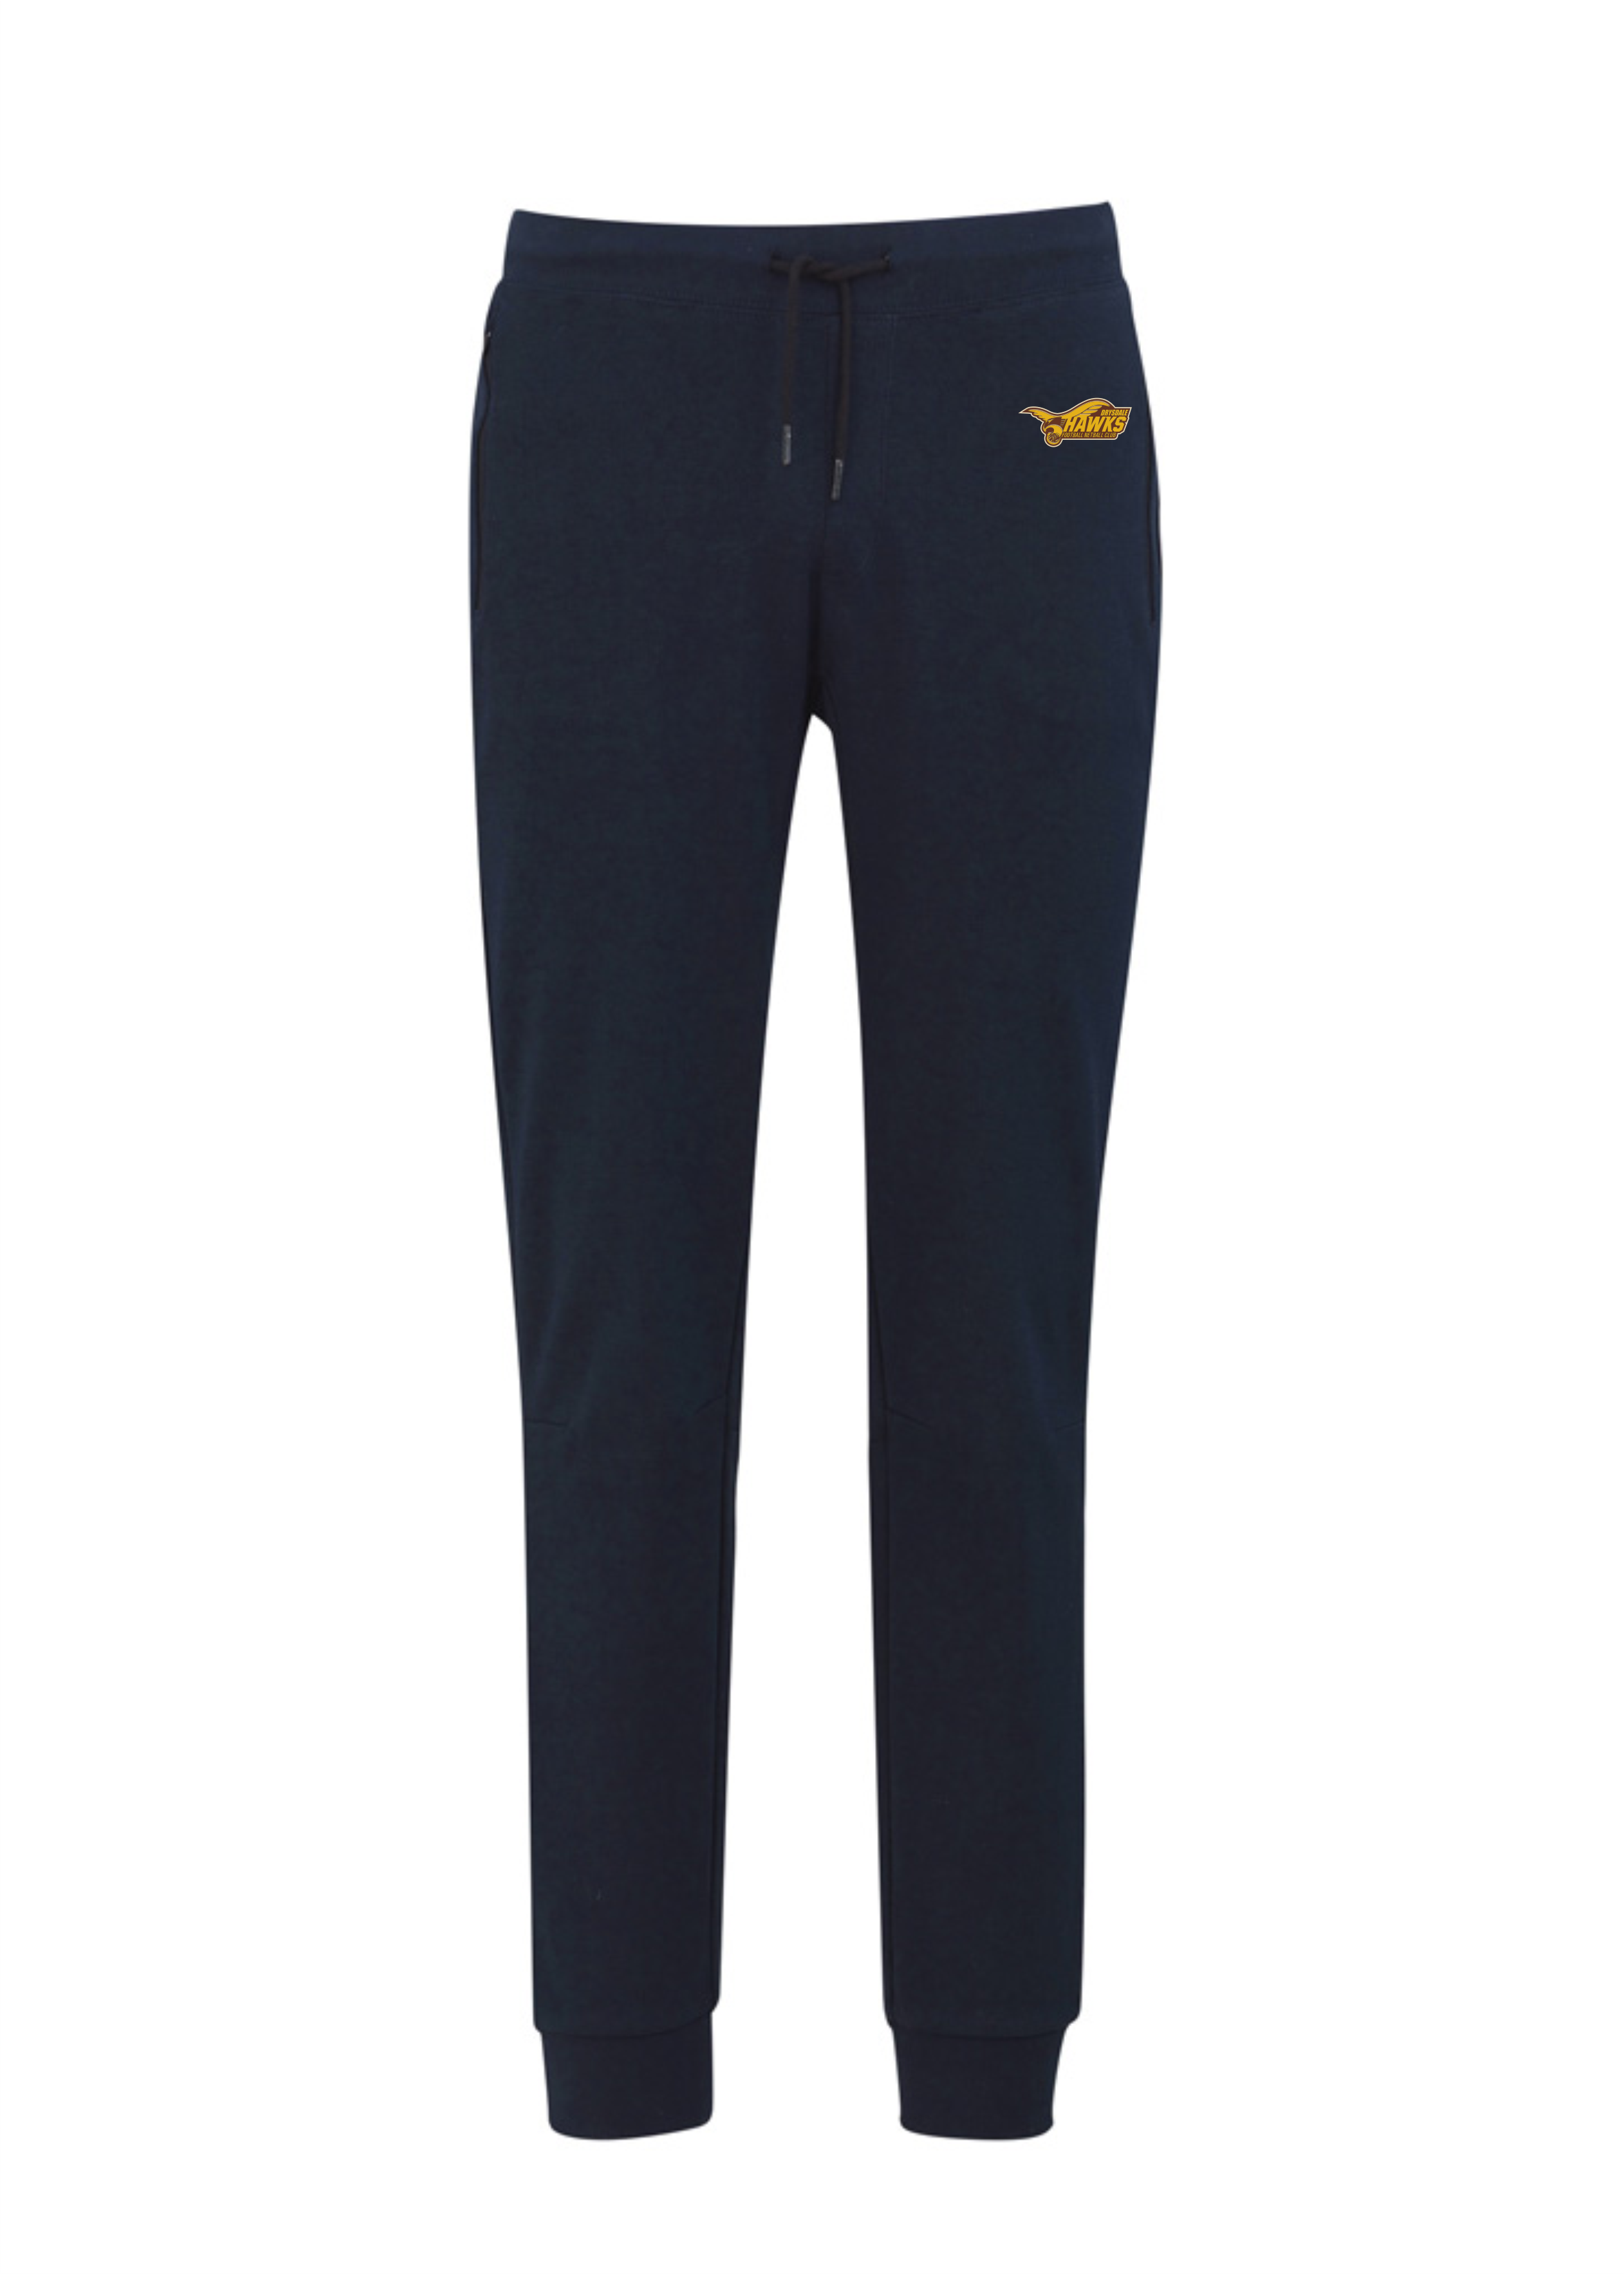 Unisex Track Pant in NAVY